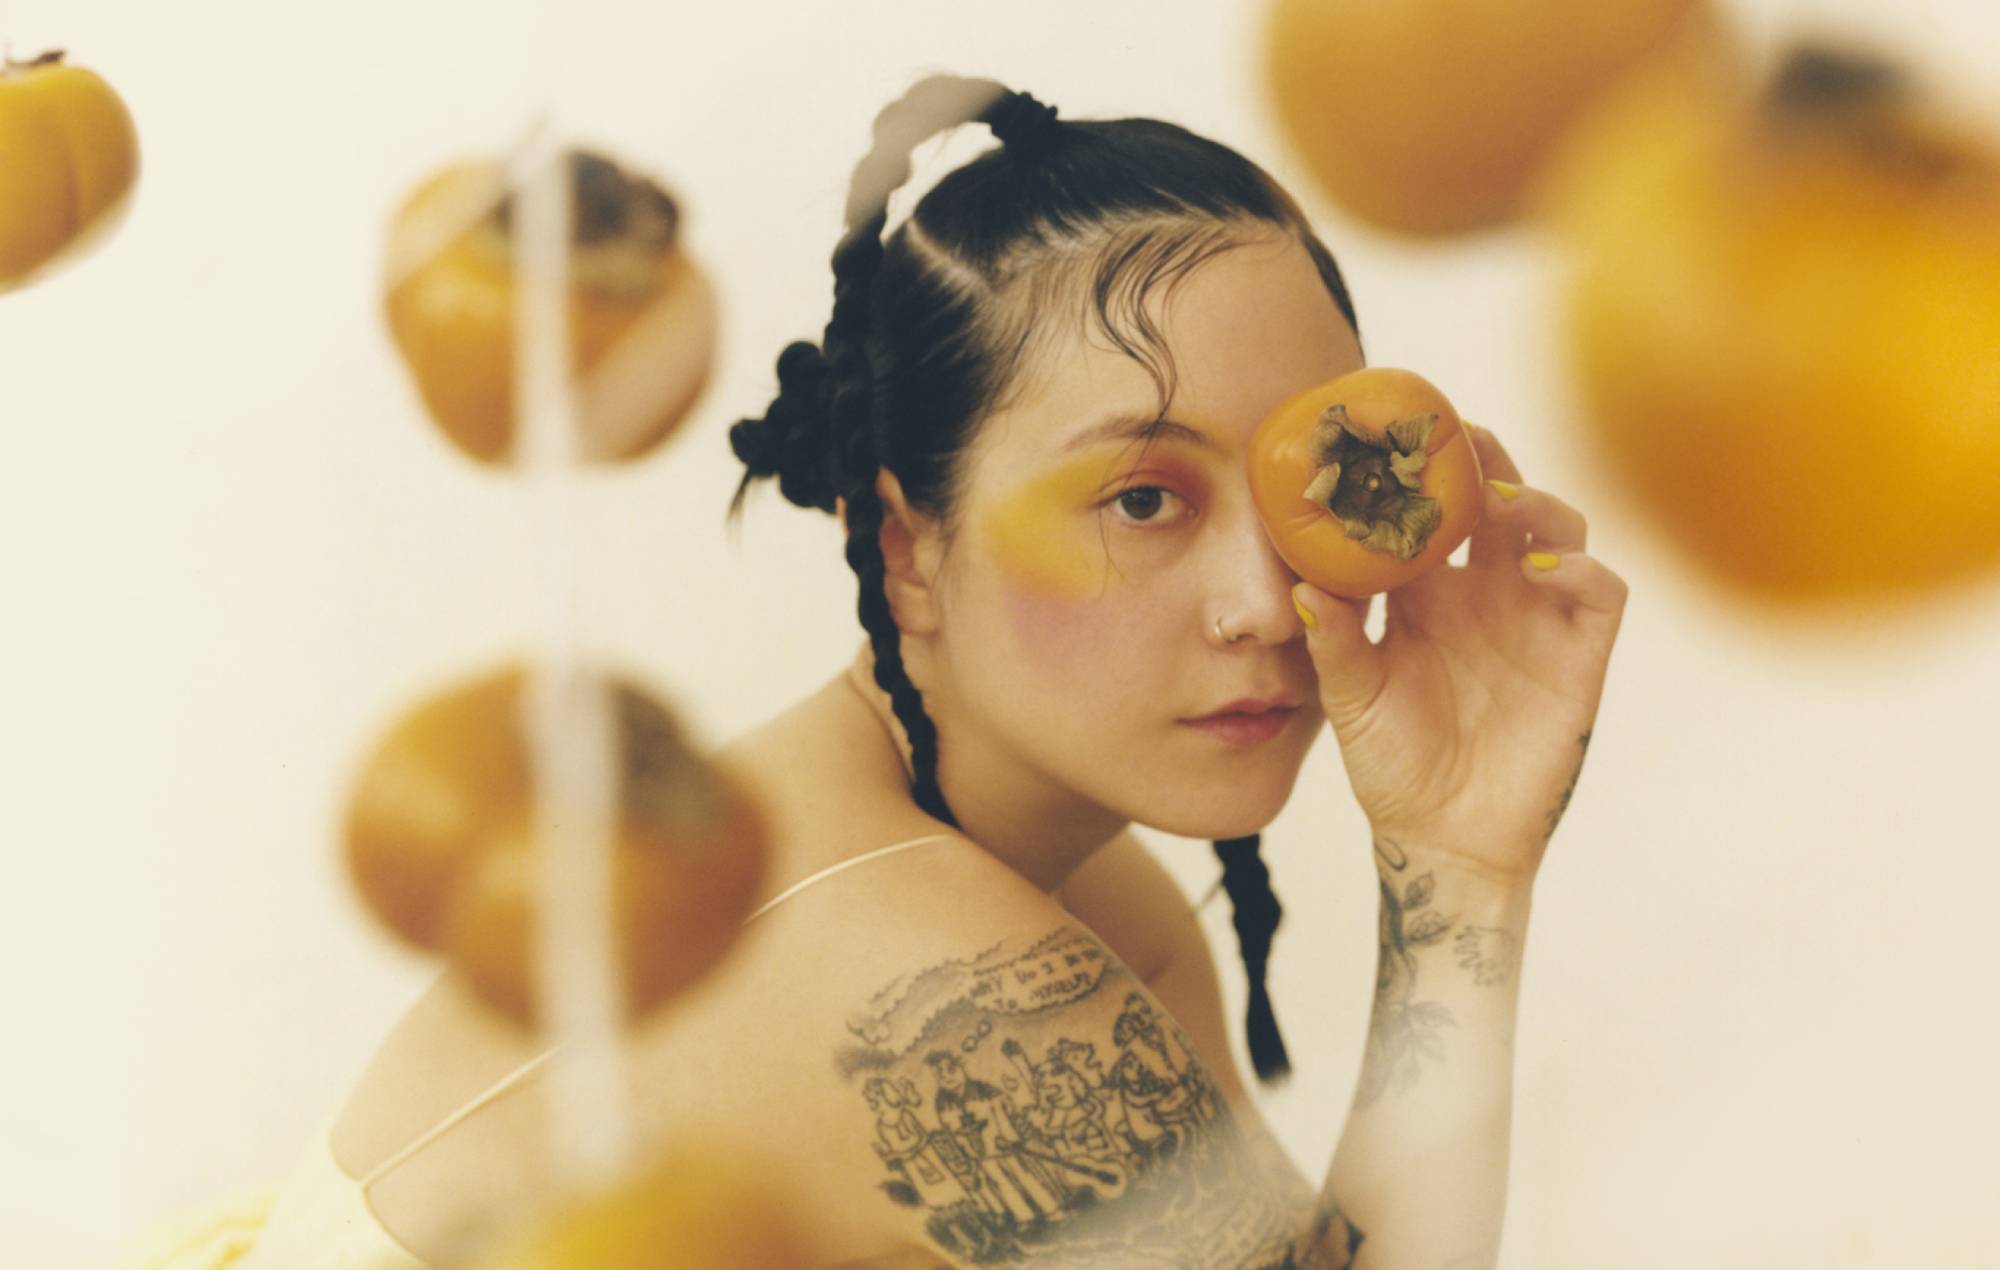 Singer Michelle Zauner squatting and covering her left eye with an orange round fruit she is holding as many other identical fruits hanging in the front